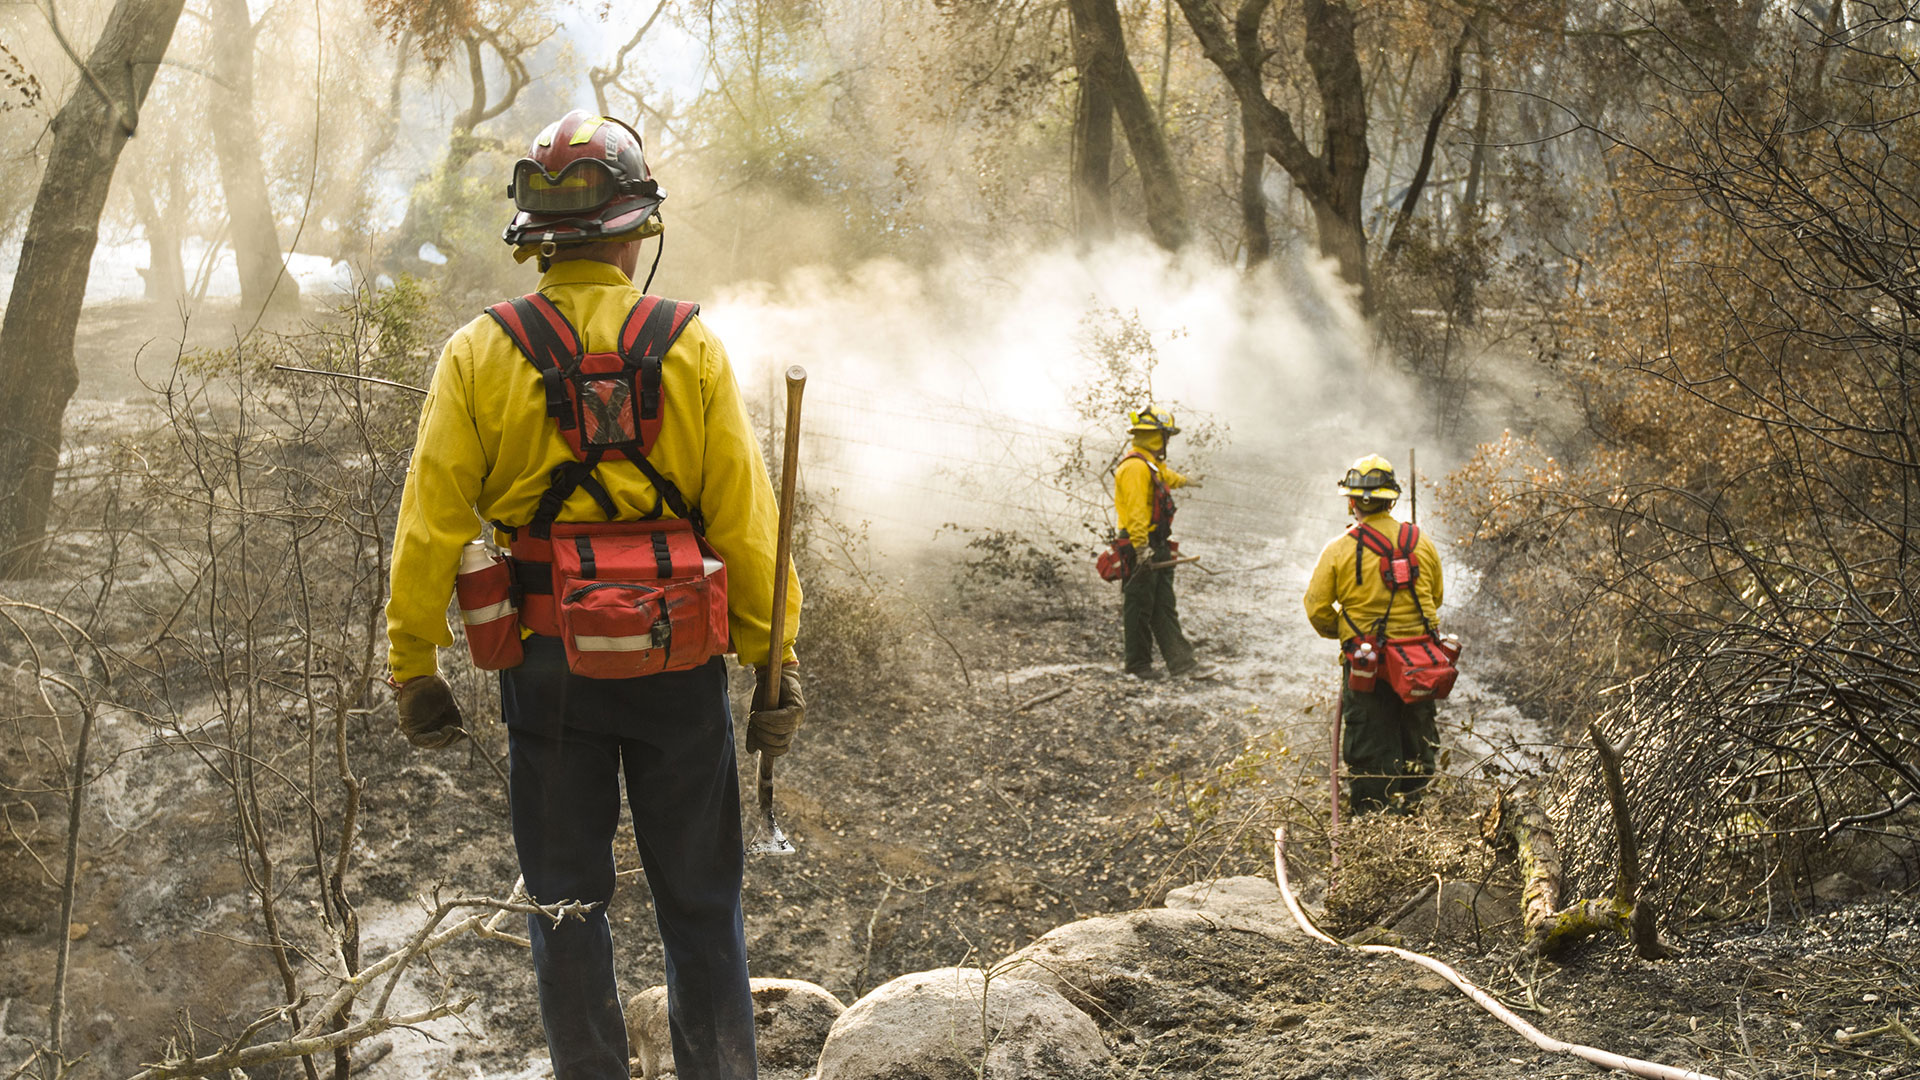 What Can FM Managers Do to Help Prepare for Wildfires